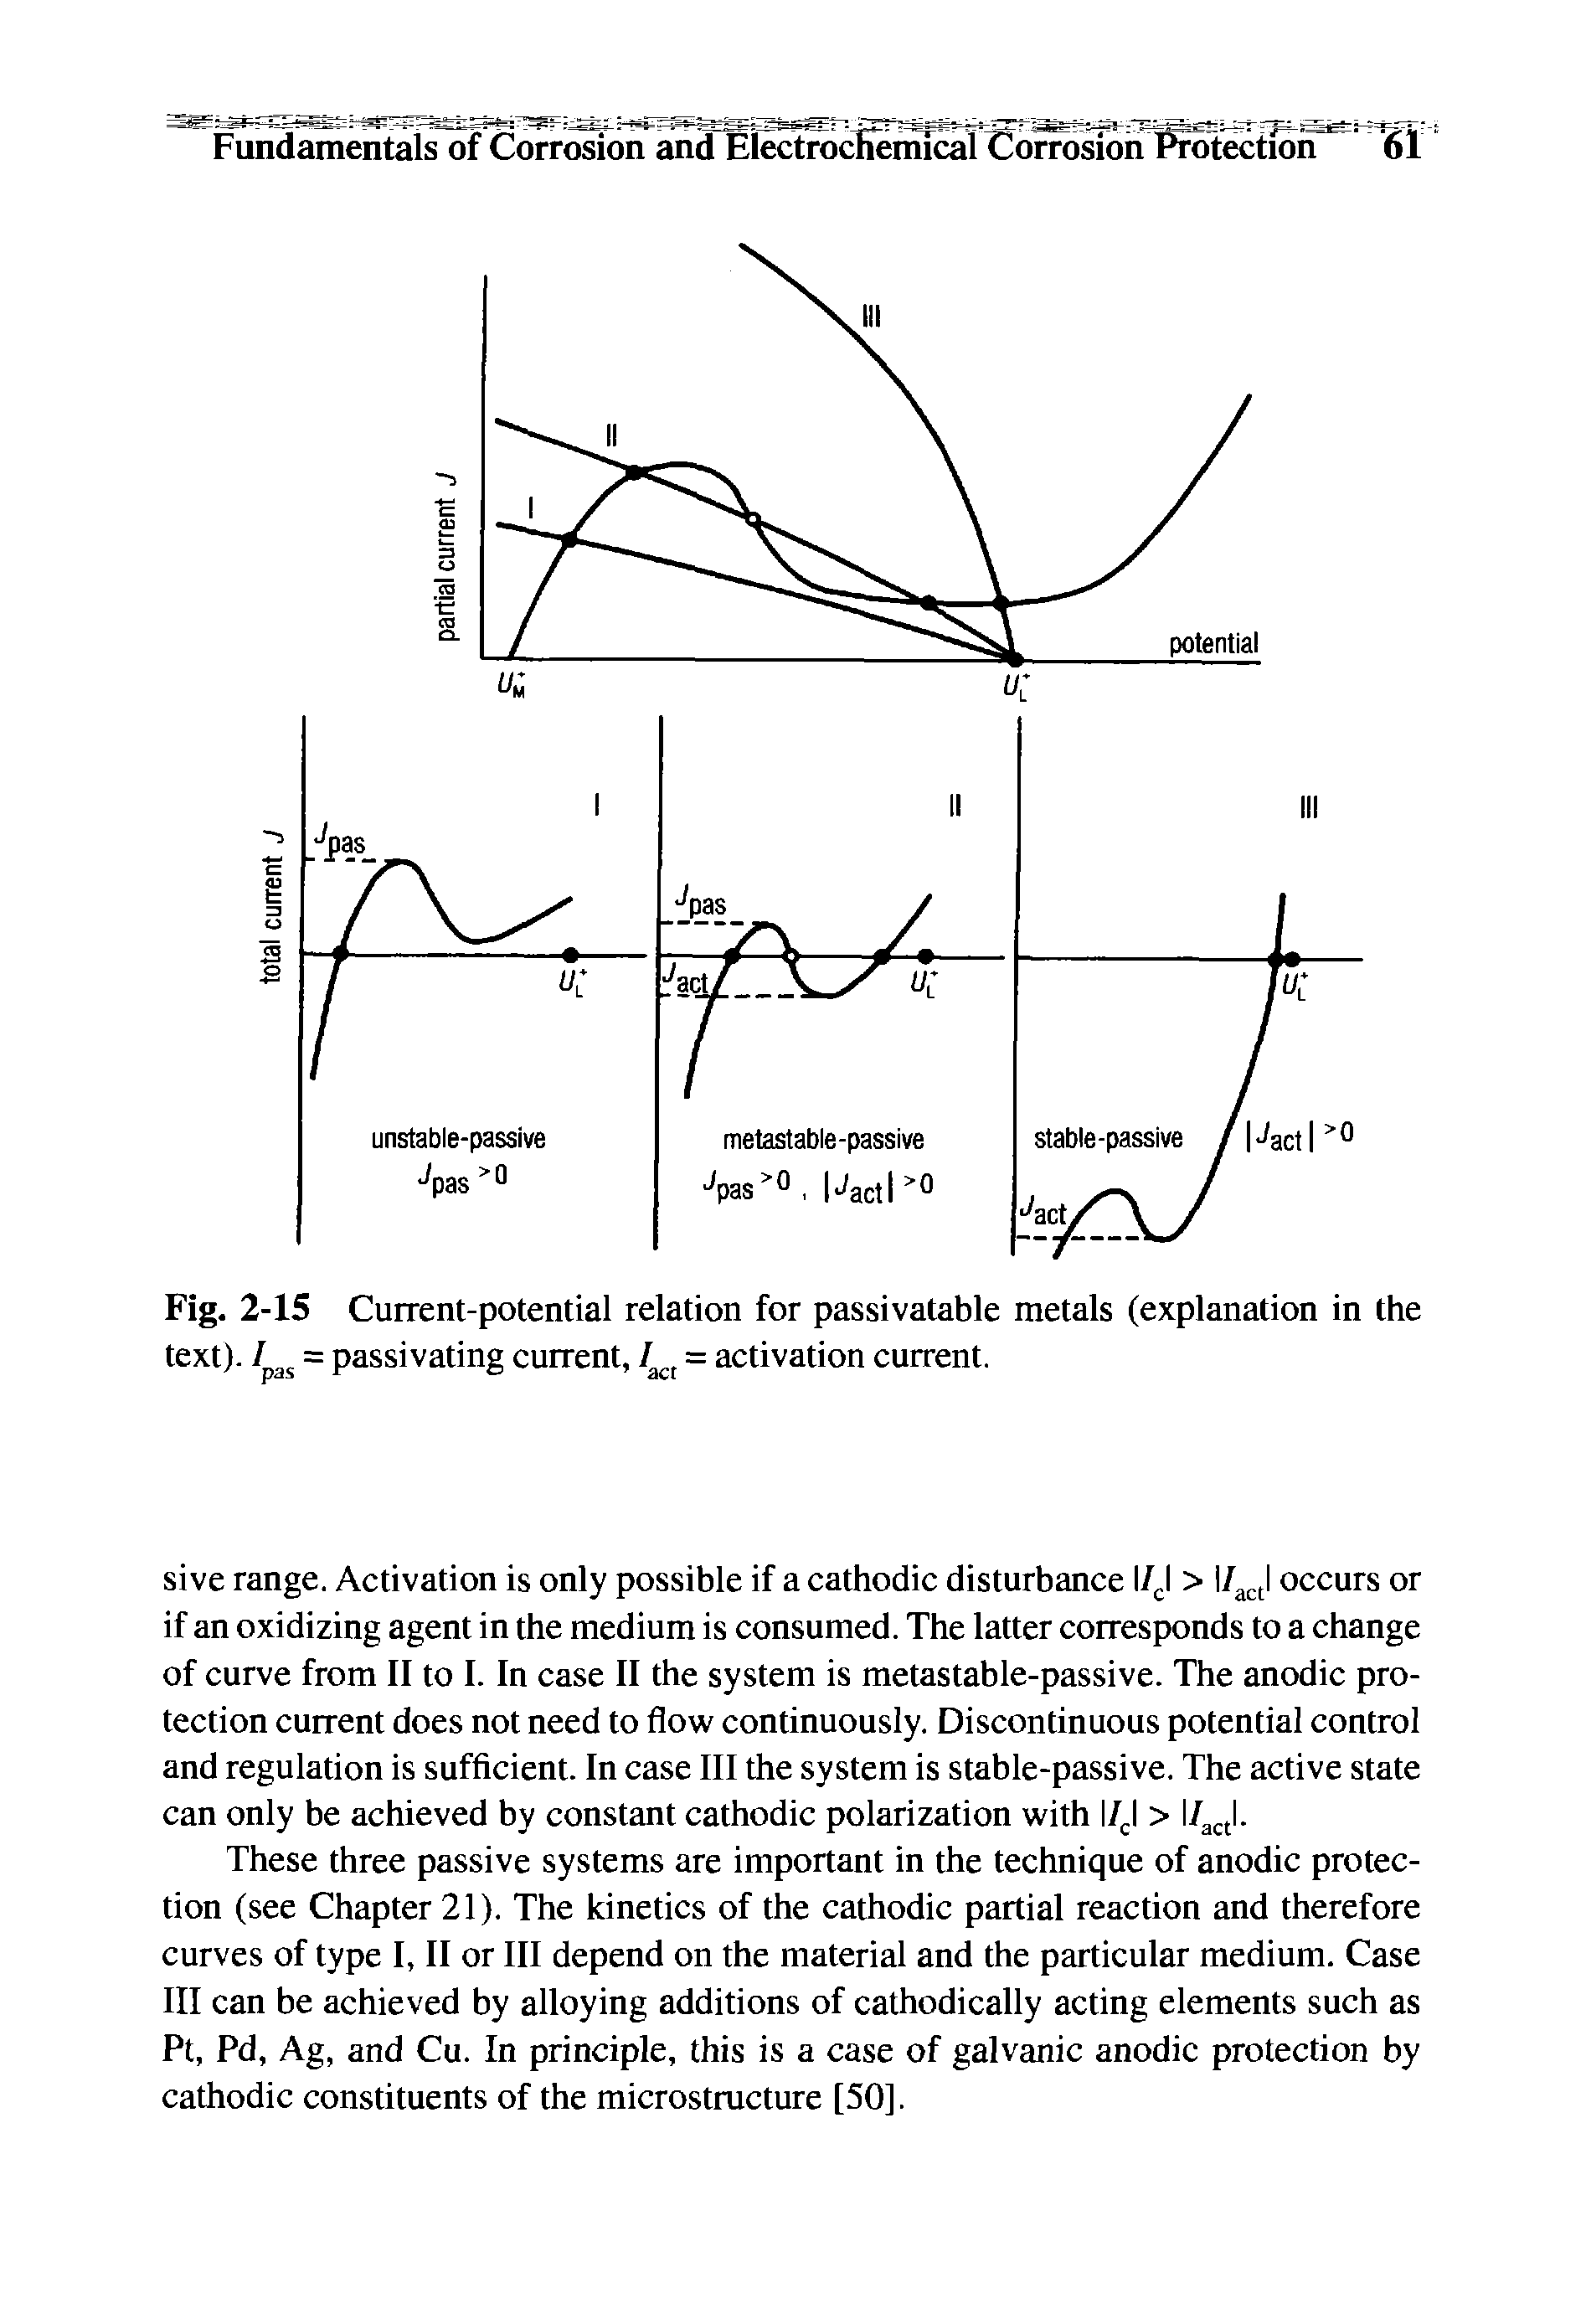 Fig. 2-15 Current-potential relation for passivatable metals (explanation in the text), = passivating current, = activation current.